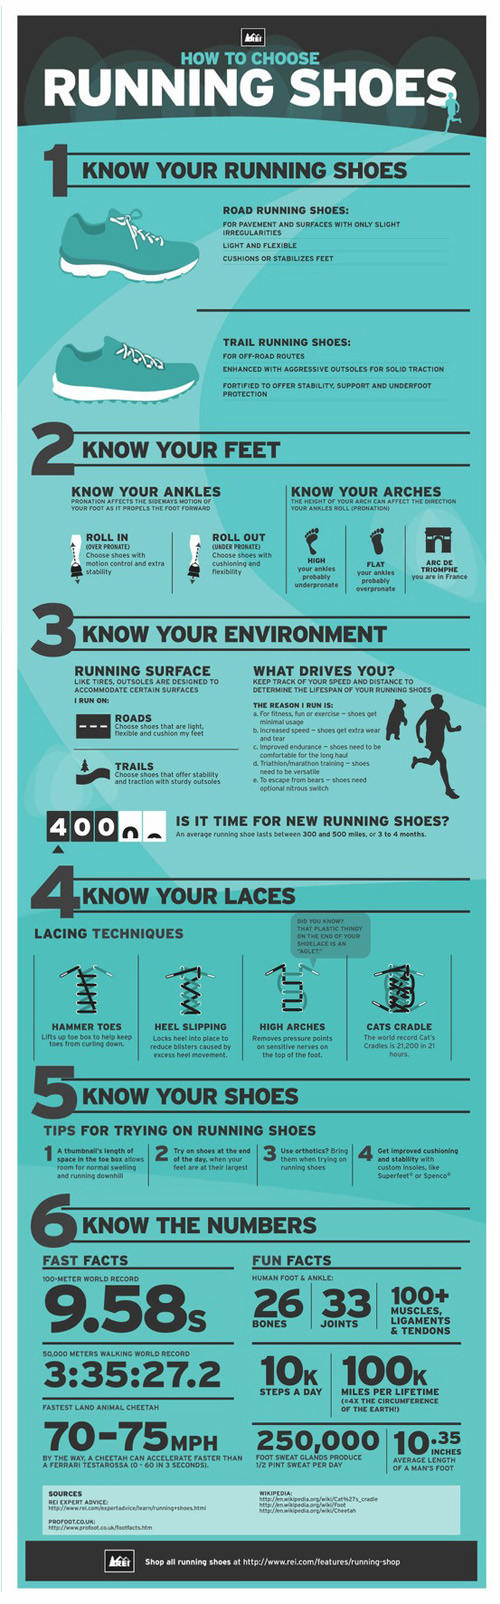 Fitness Stuff #342: How To Choose Running Shoes